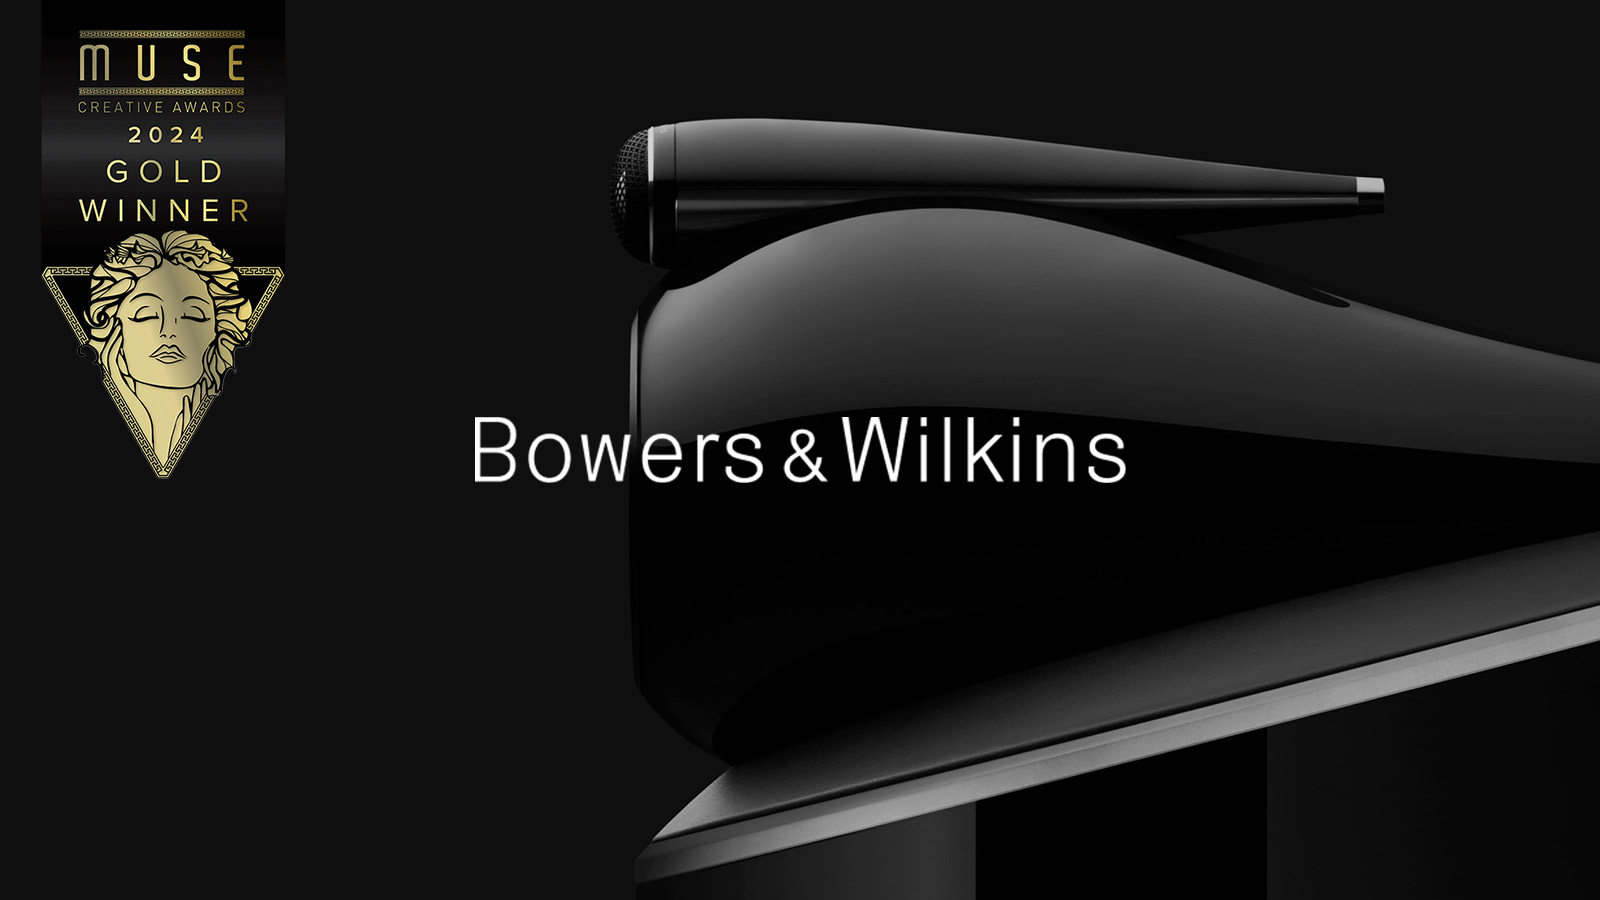 Bowers & Wilkins Wins Gold for MUSE Awards "Website - Electronics"